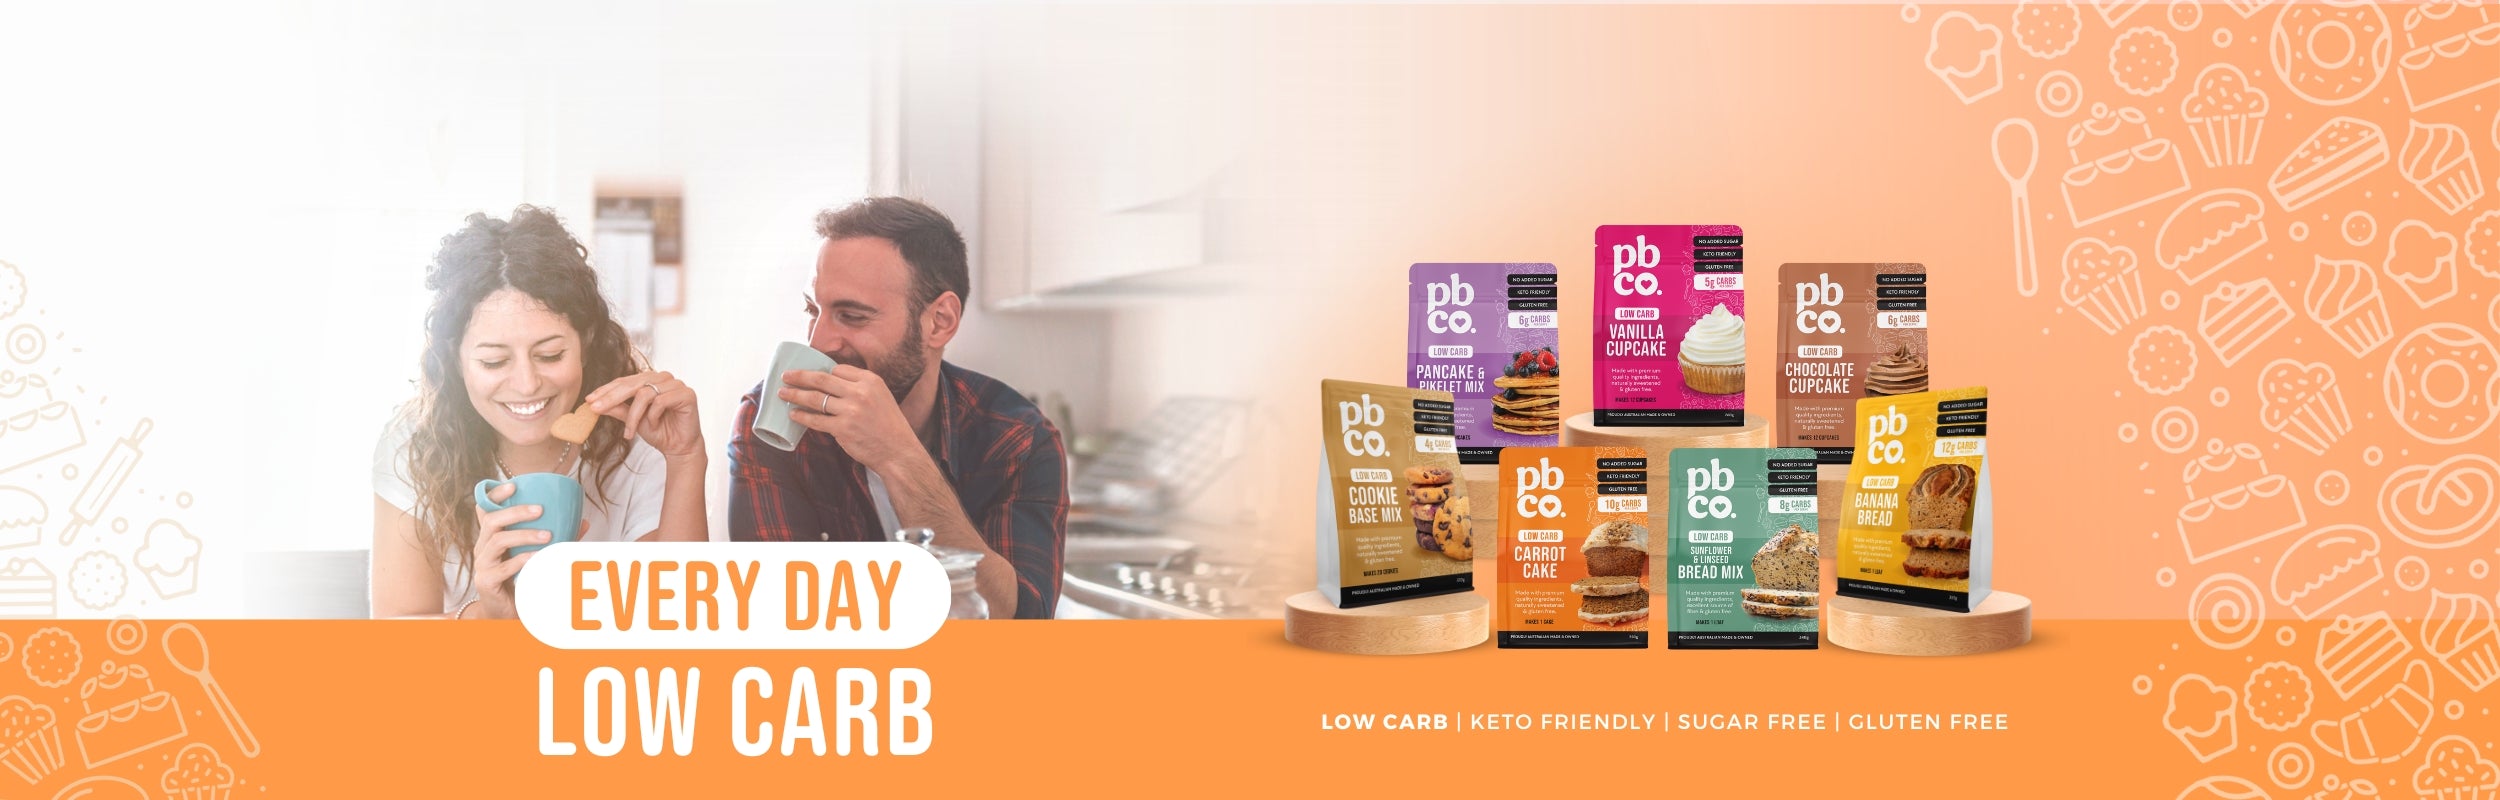 PBCo. Every Day Low Carb range of baking mixes